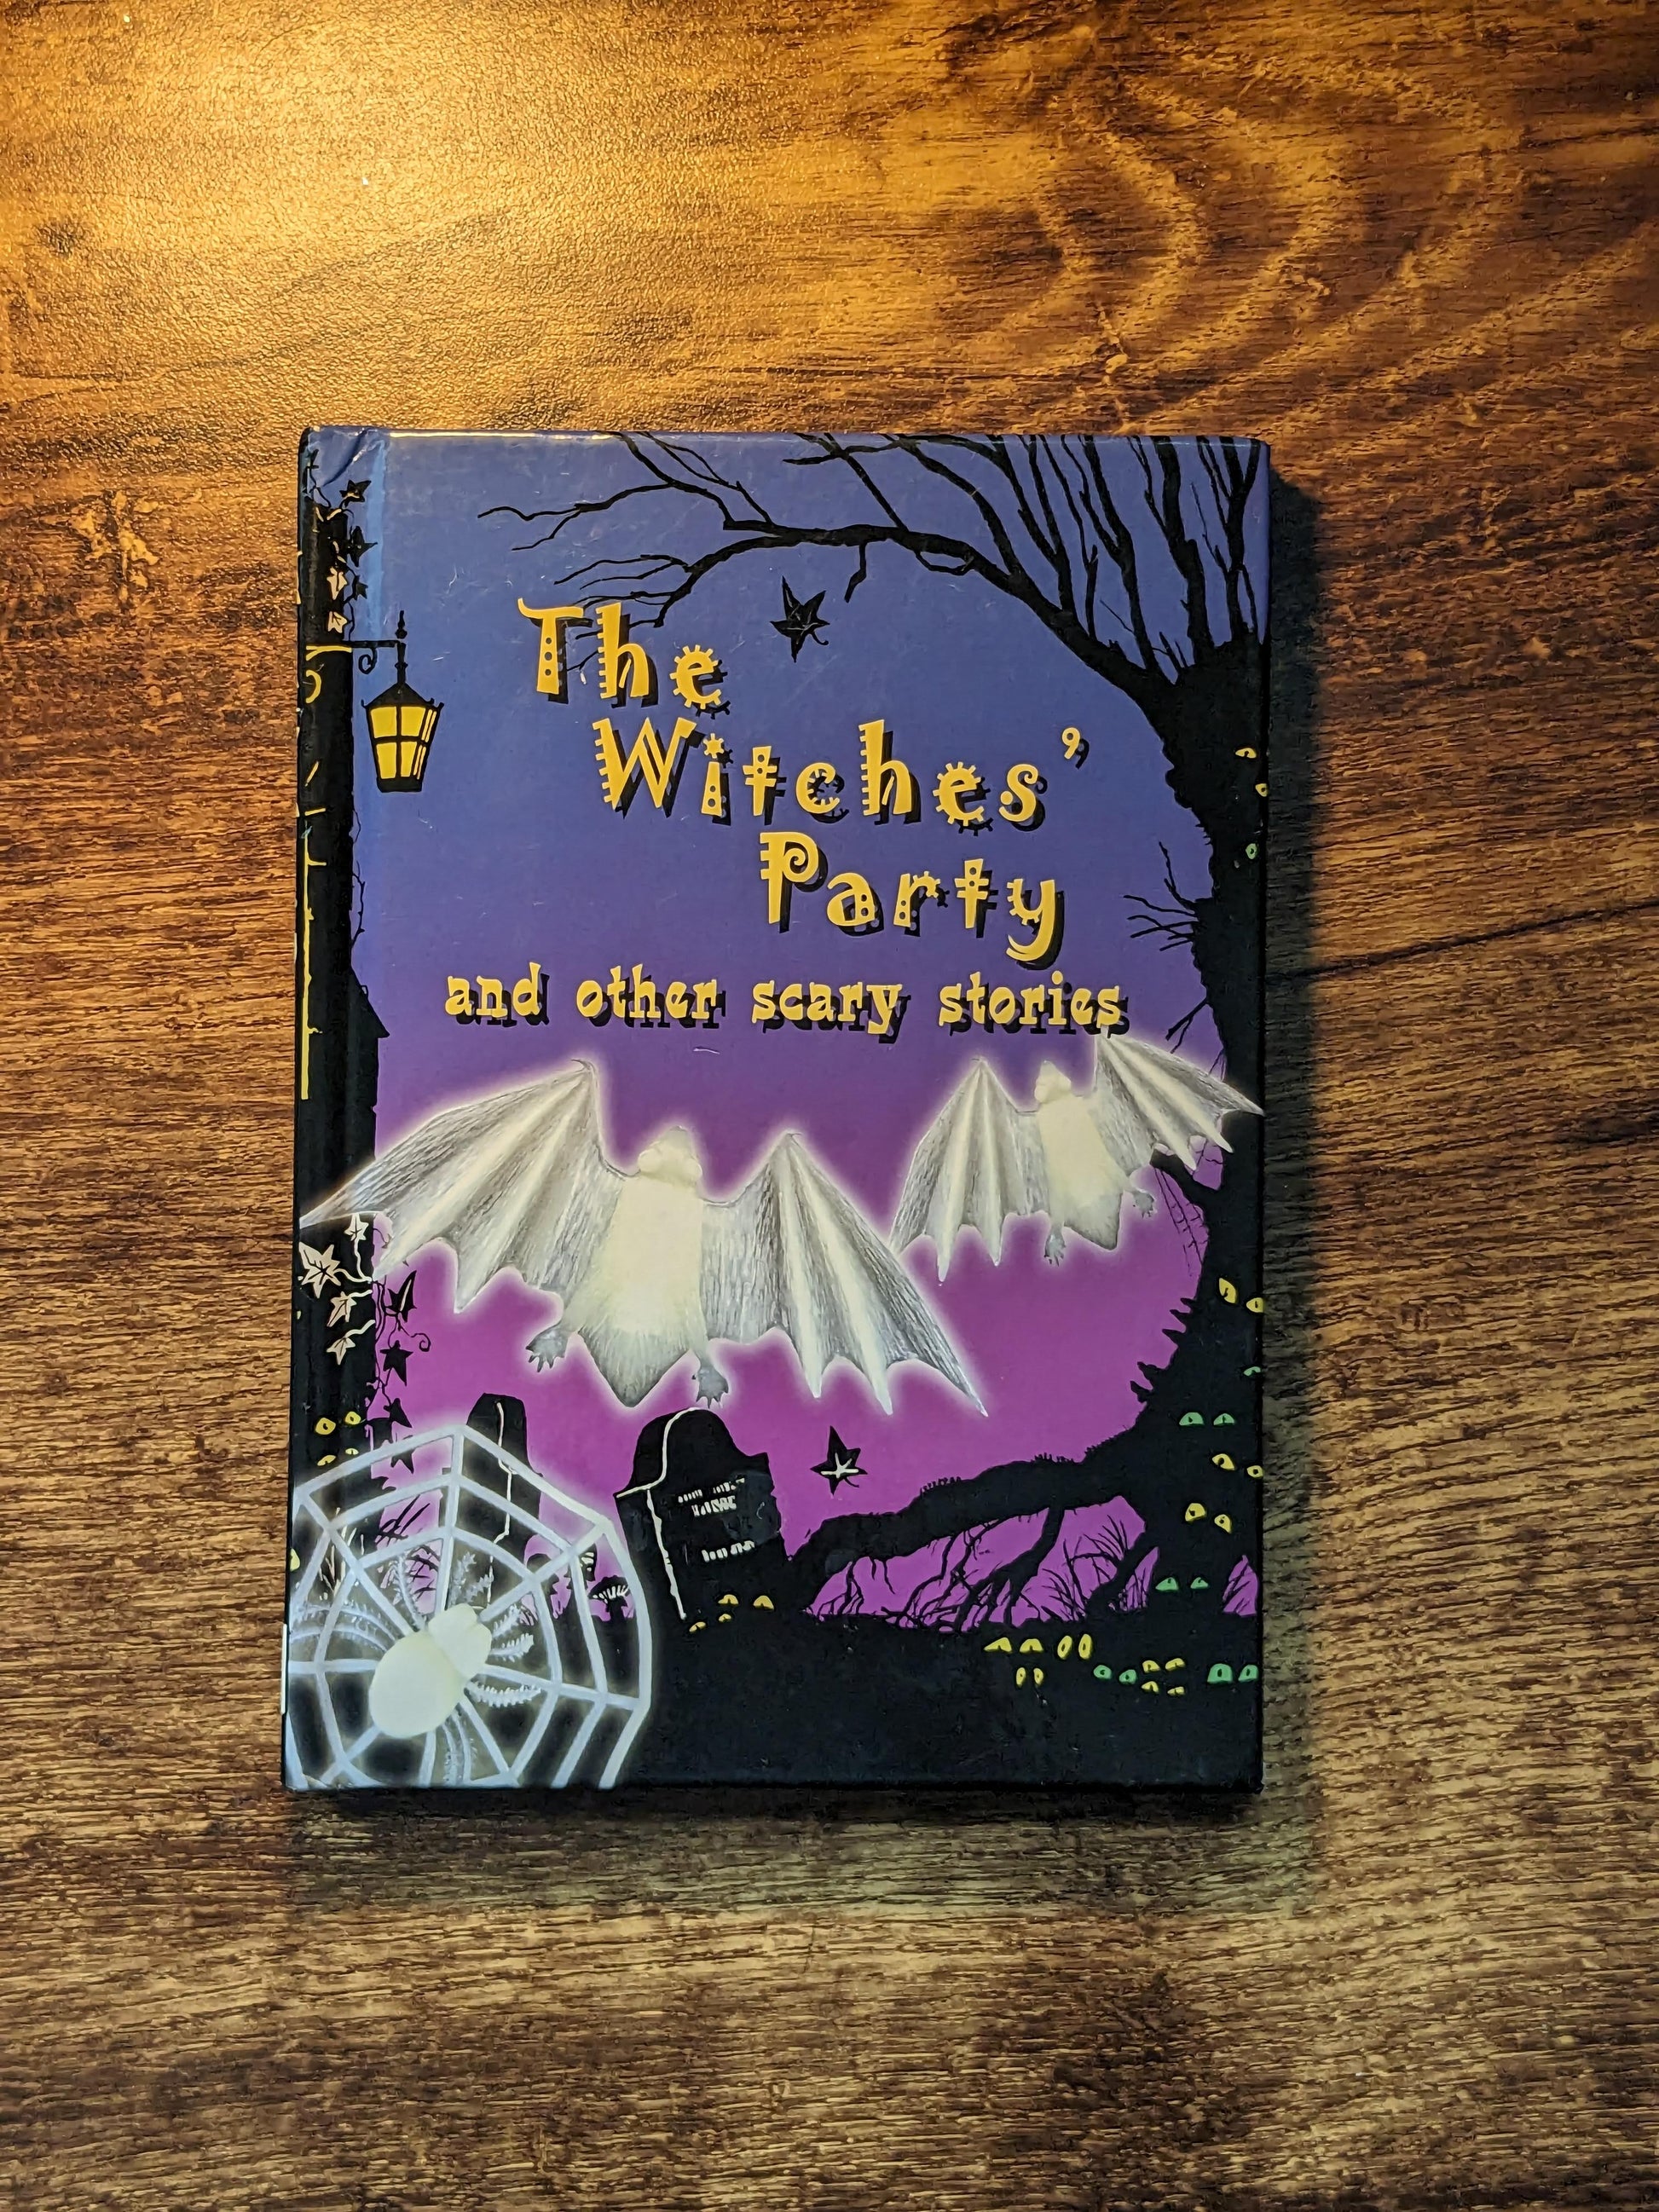 Witches' Party, The: And Other Scary Stories by Repchuk, Caroline (Vintage Hardcover) - Asylum Books